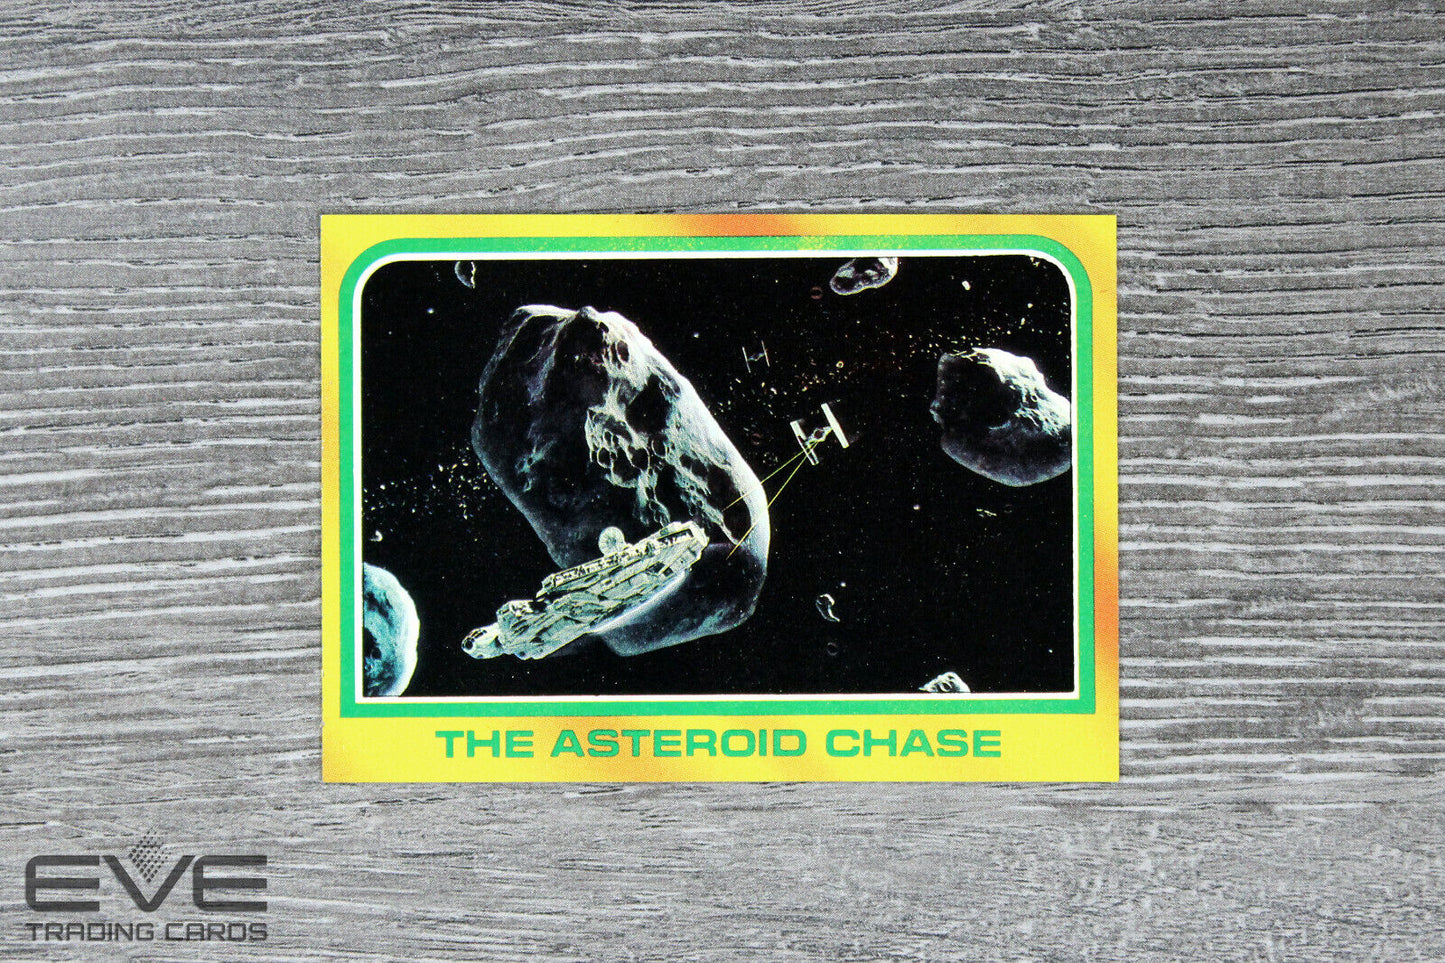 1980 Topps Vintage Star Wars Empire Strikes Back S3 Card #334 The Asteroid Chase